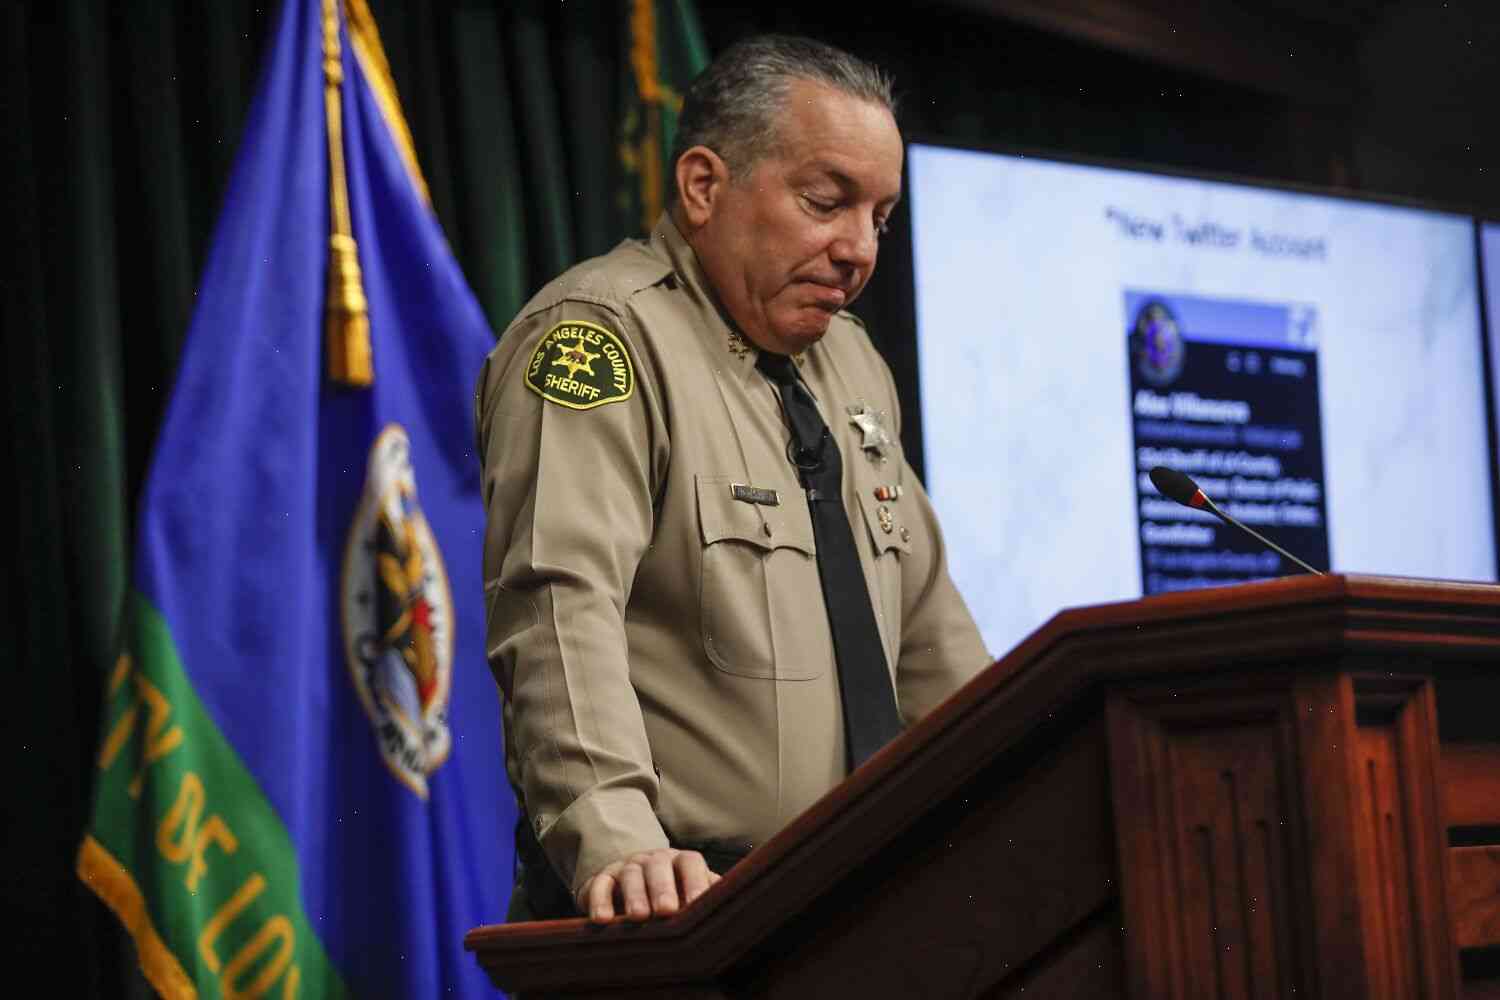 The L.A. County Sheriff's Office Update